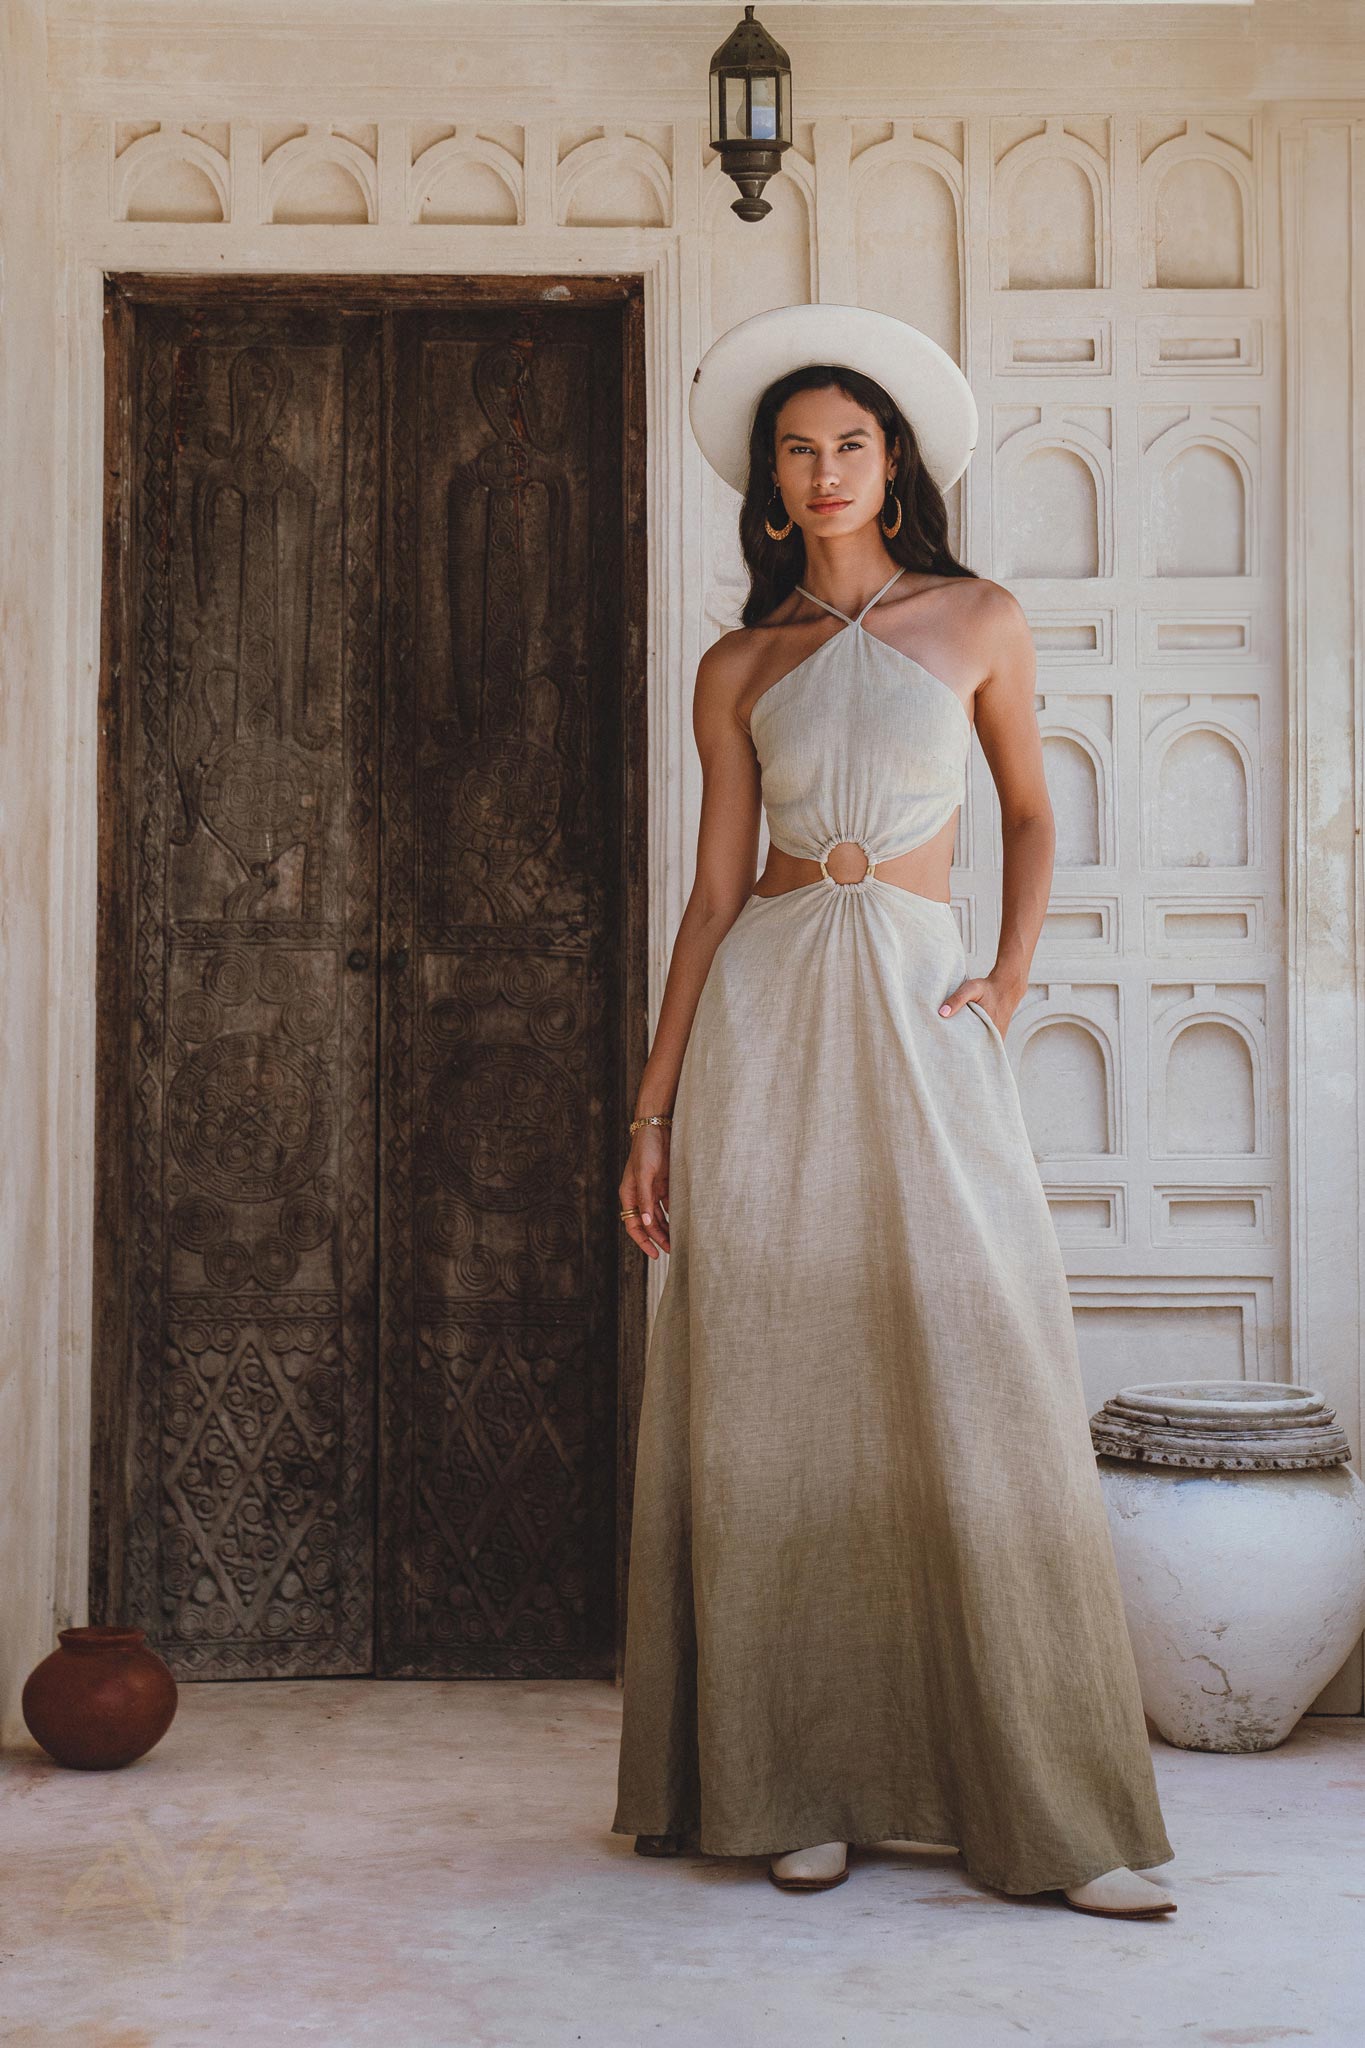 Sustainably Dyed Organic Linen Maxi Dress with open sides - A unique Sage Green Goddess Dress for summer celebrations, tailored for comfort.